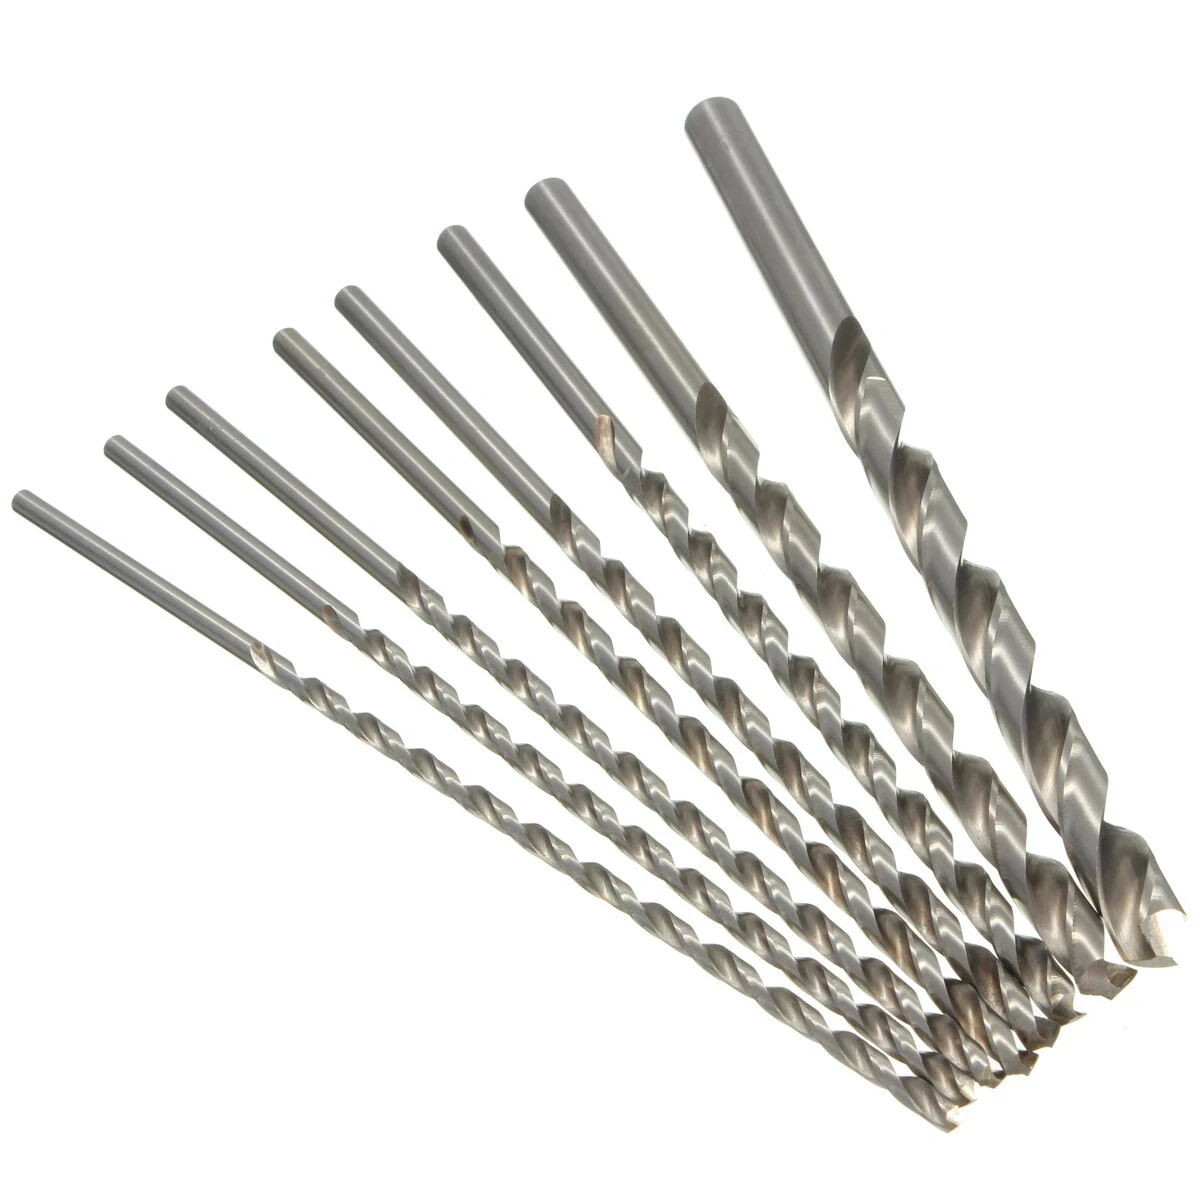 

2mm/3mm/4mm/5mm/6mm/7mm/8mm Length 200mm Extra Long HSS Straight Shank Drill Bit Wood Aluminum And Plastic Extended Twist Drill